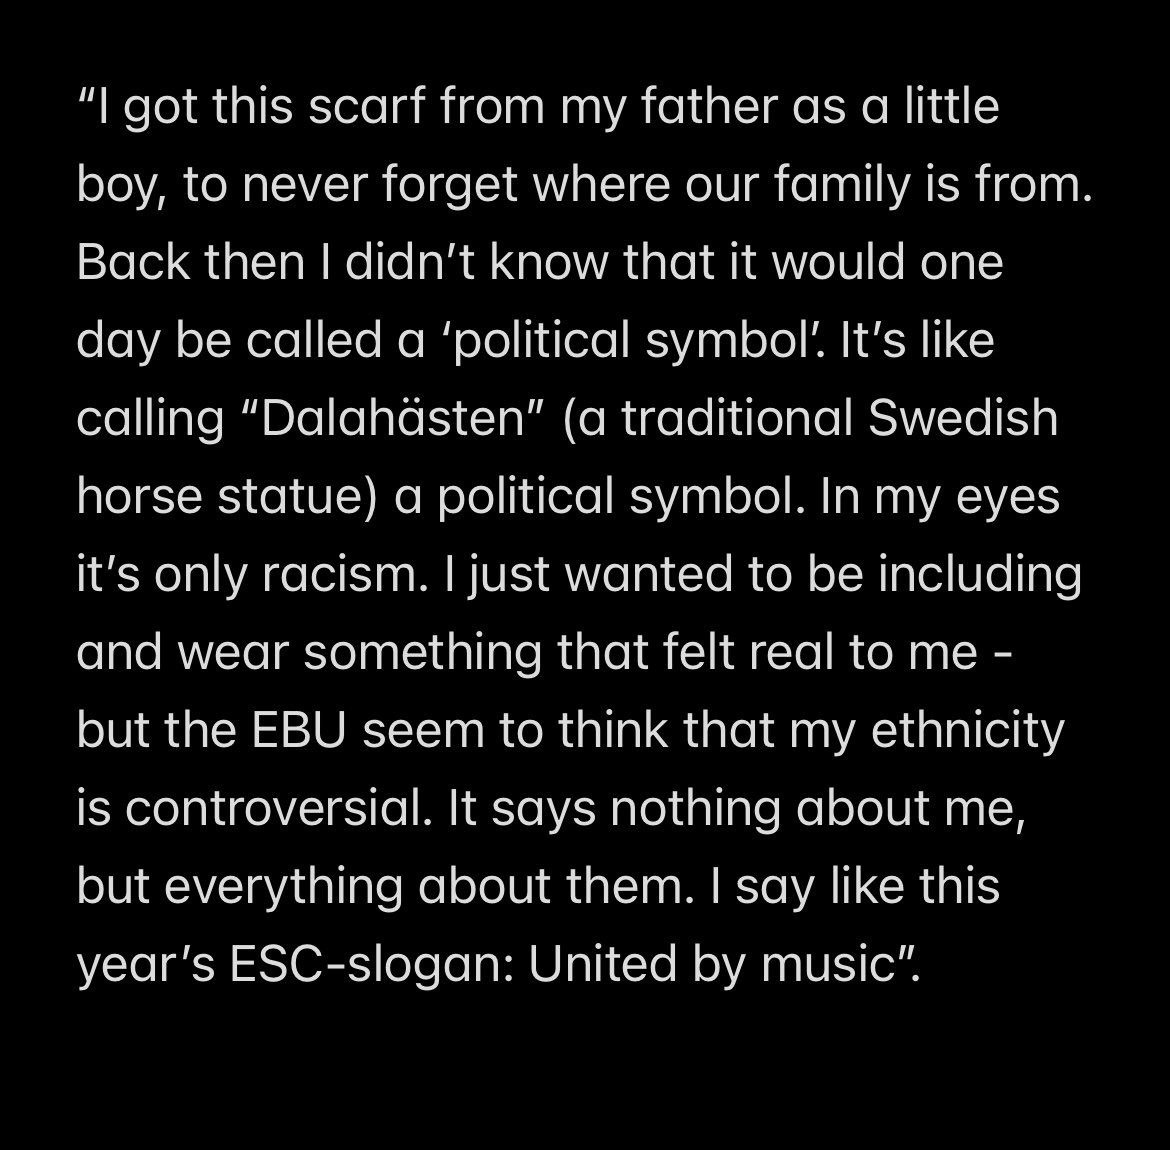 Eric gave a statement to Swedish news that I thought was really well said so I have translated it to the best of my ability: